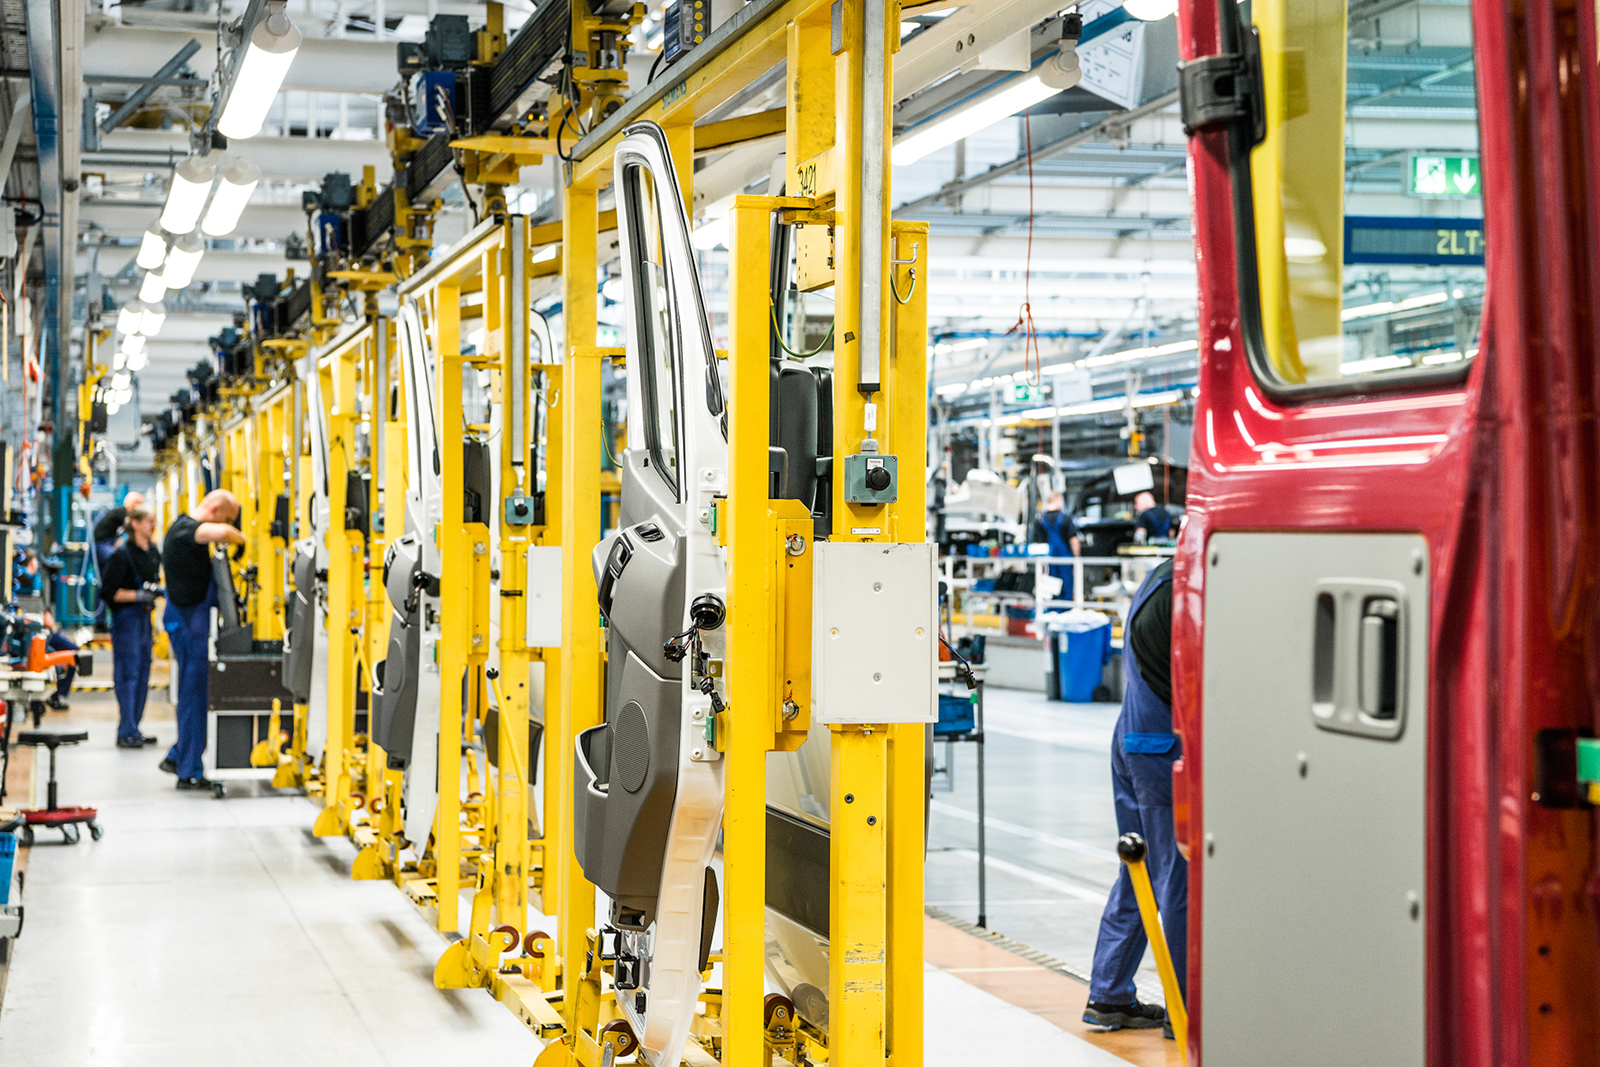 RFID technology makes Motor vehicle manufacturers’ supply chain and manufacturing operations more transparent.